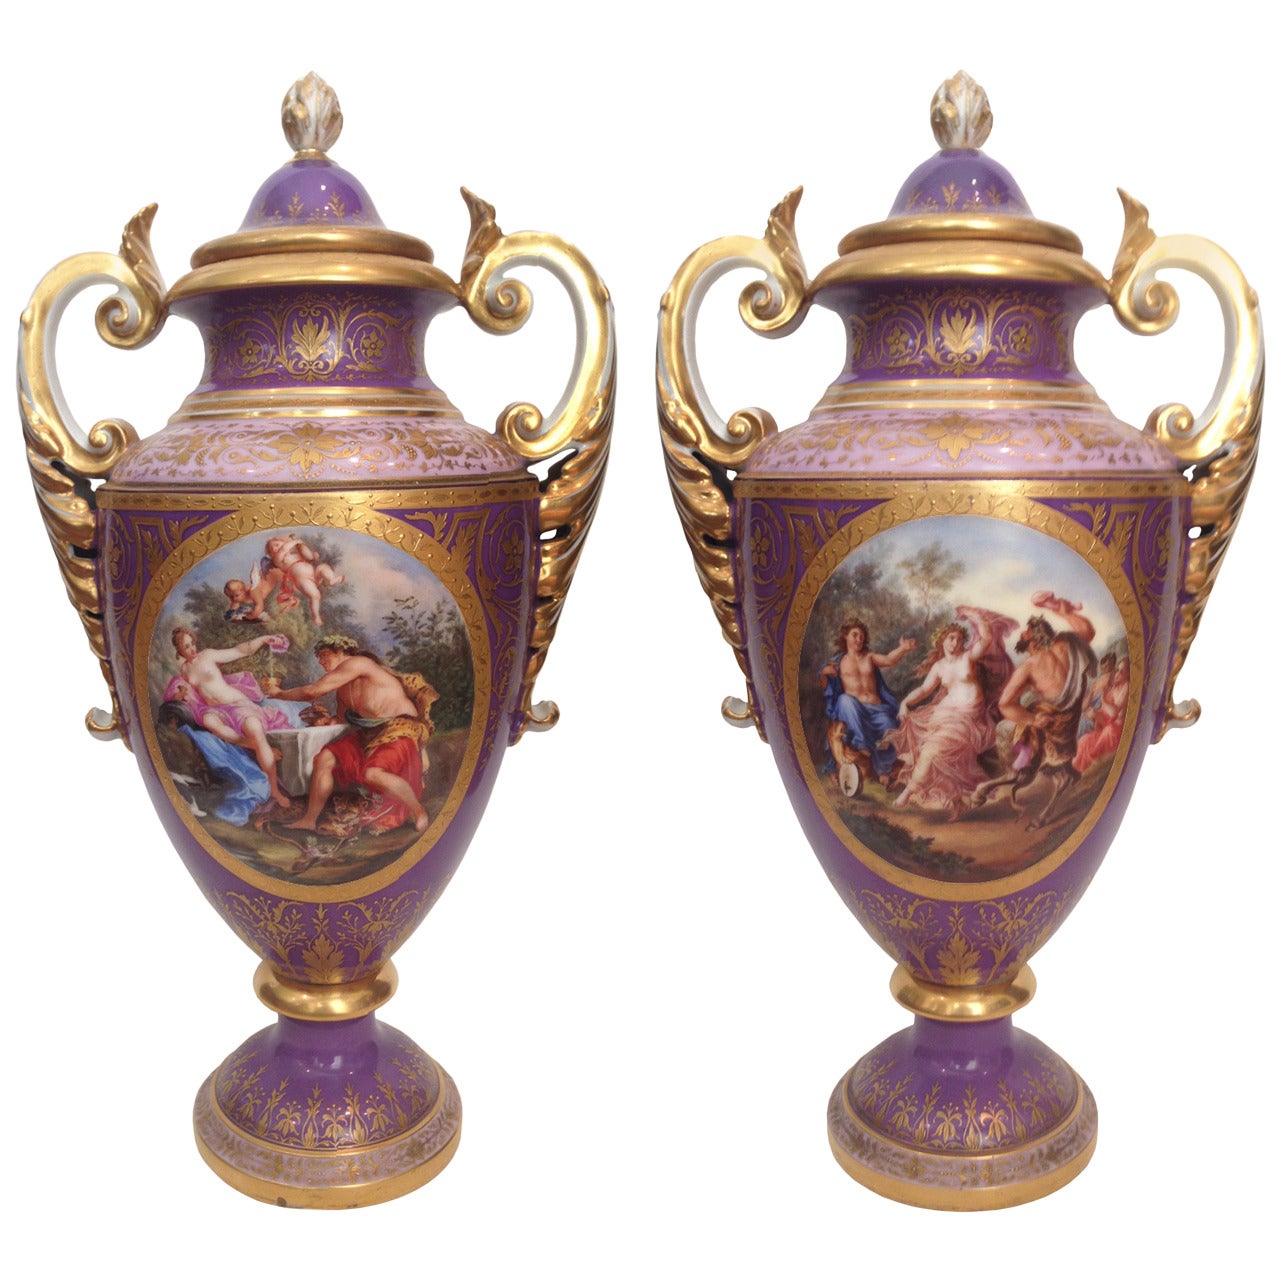 Extremely Rare Vienna Porcelain Covered Urns Fantastic Color, 19th Century For Sale